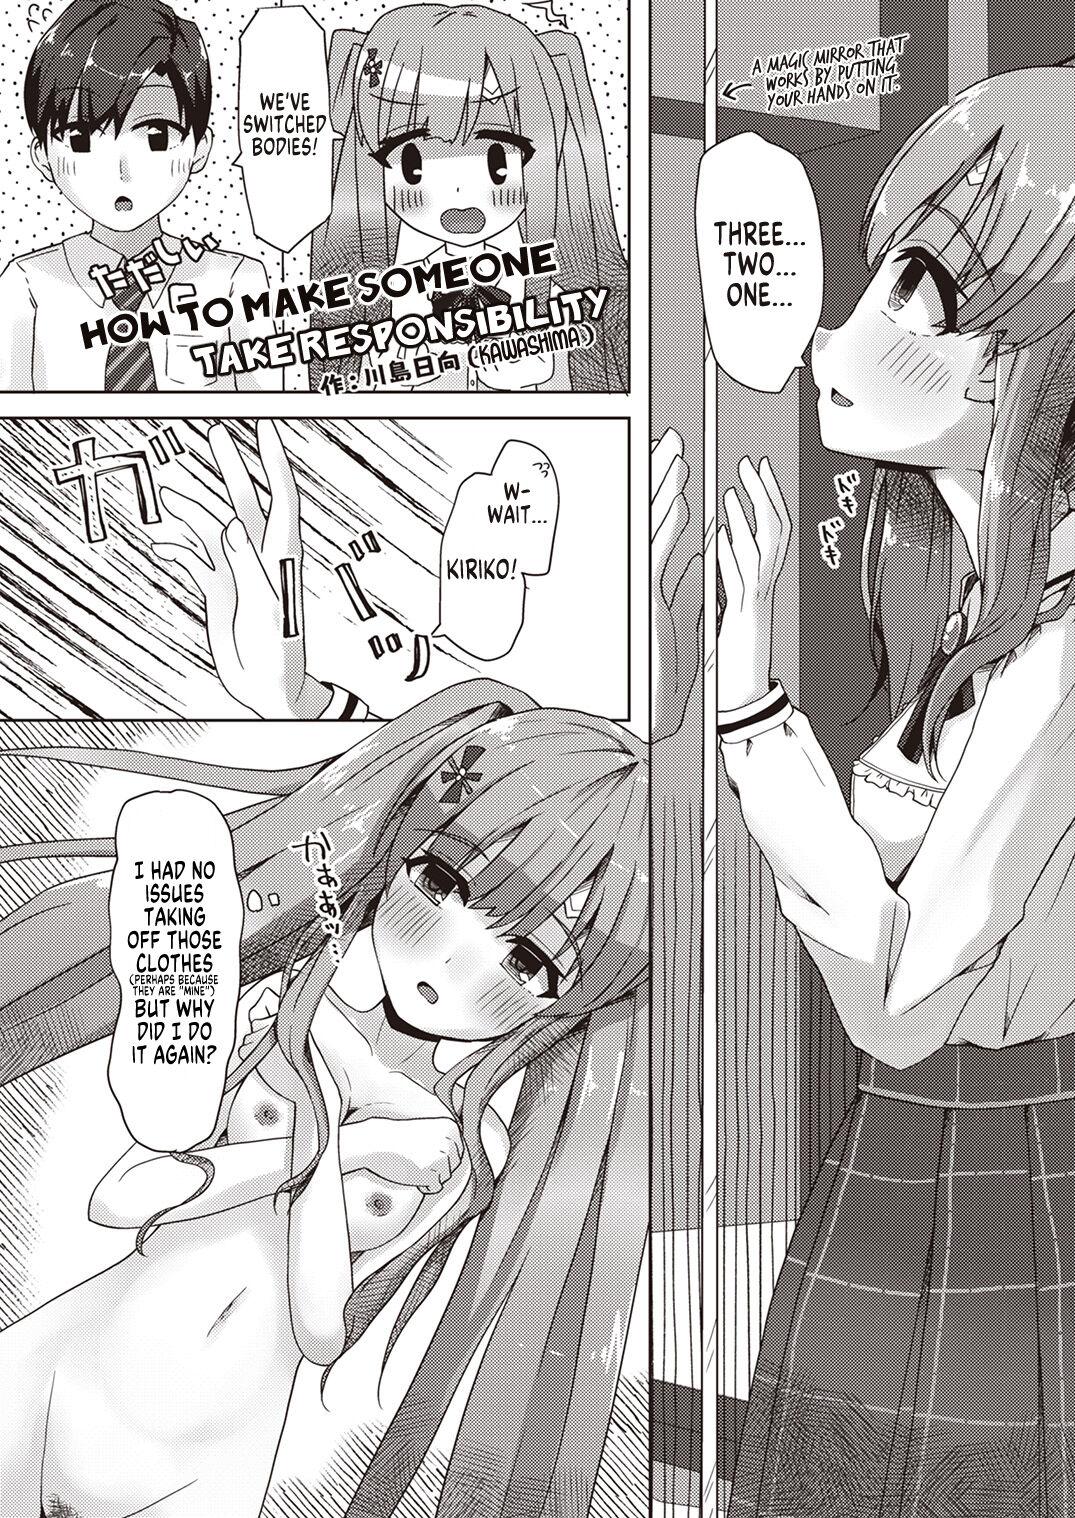 Con How to Make Someone Take Responsibility - Original The idolmaster Massive - Page 1